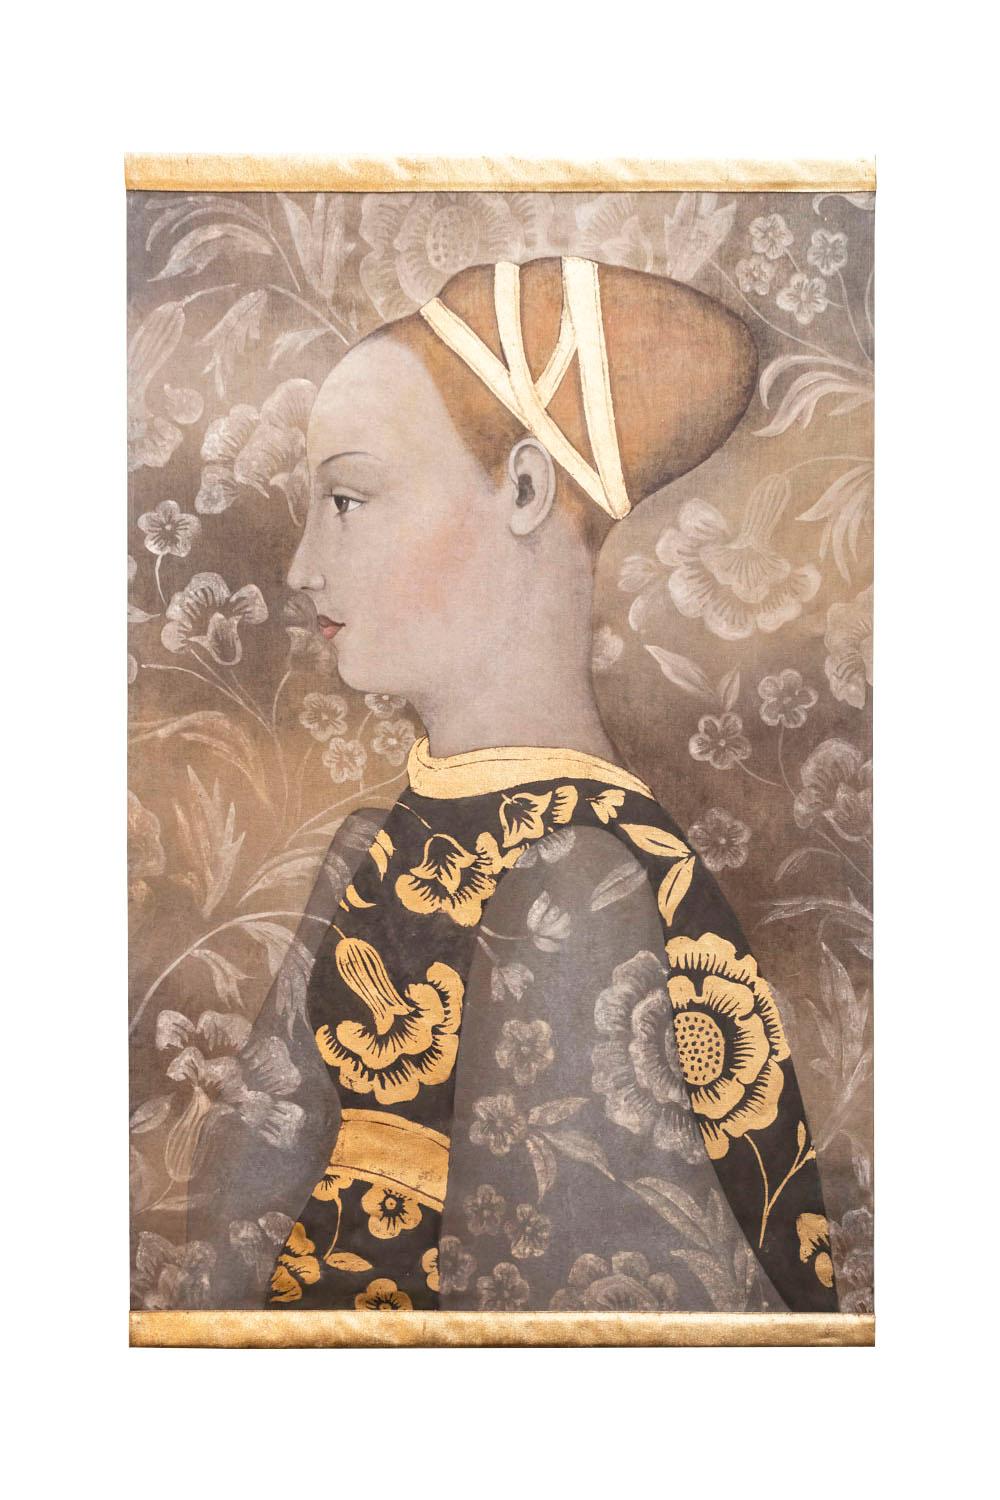 Painted canvas figuring a side view of a woman portrait in the Renaissance style. 
She wears a black dress with a gilt collar, belt with gilt flower motifs, grey sleeves adorned with white floral motifs. The woman is ginger with a shaved forehead